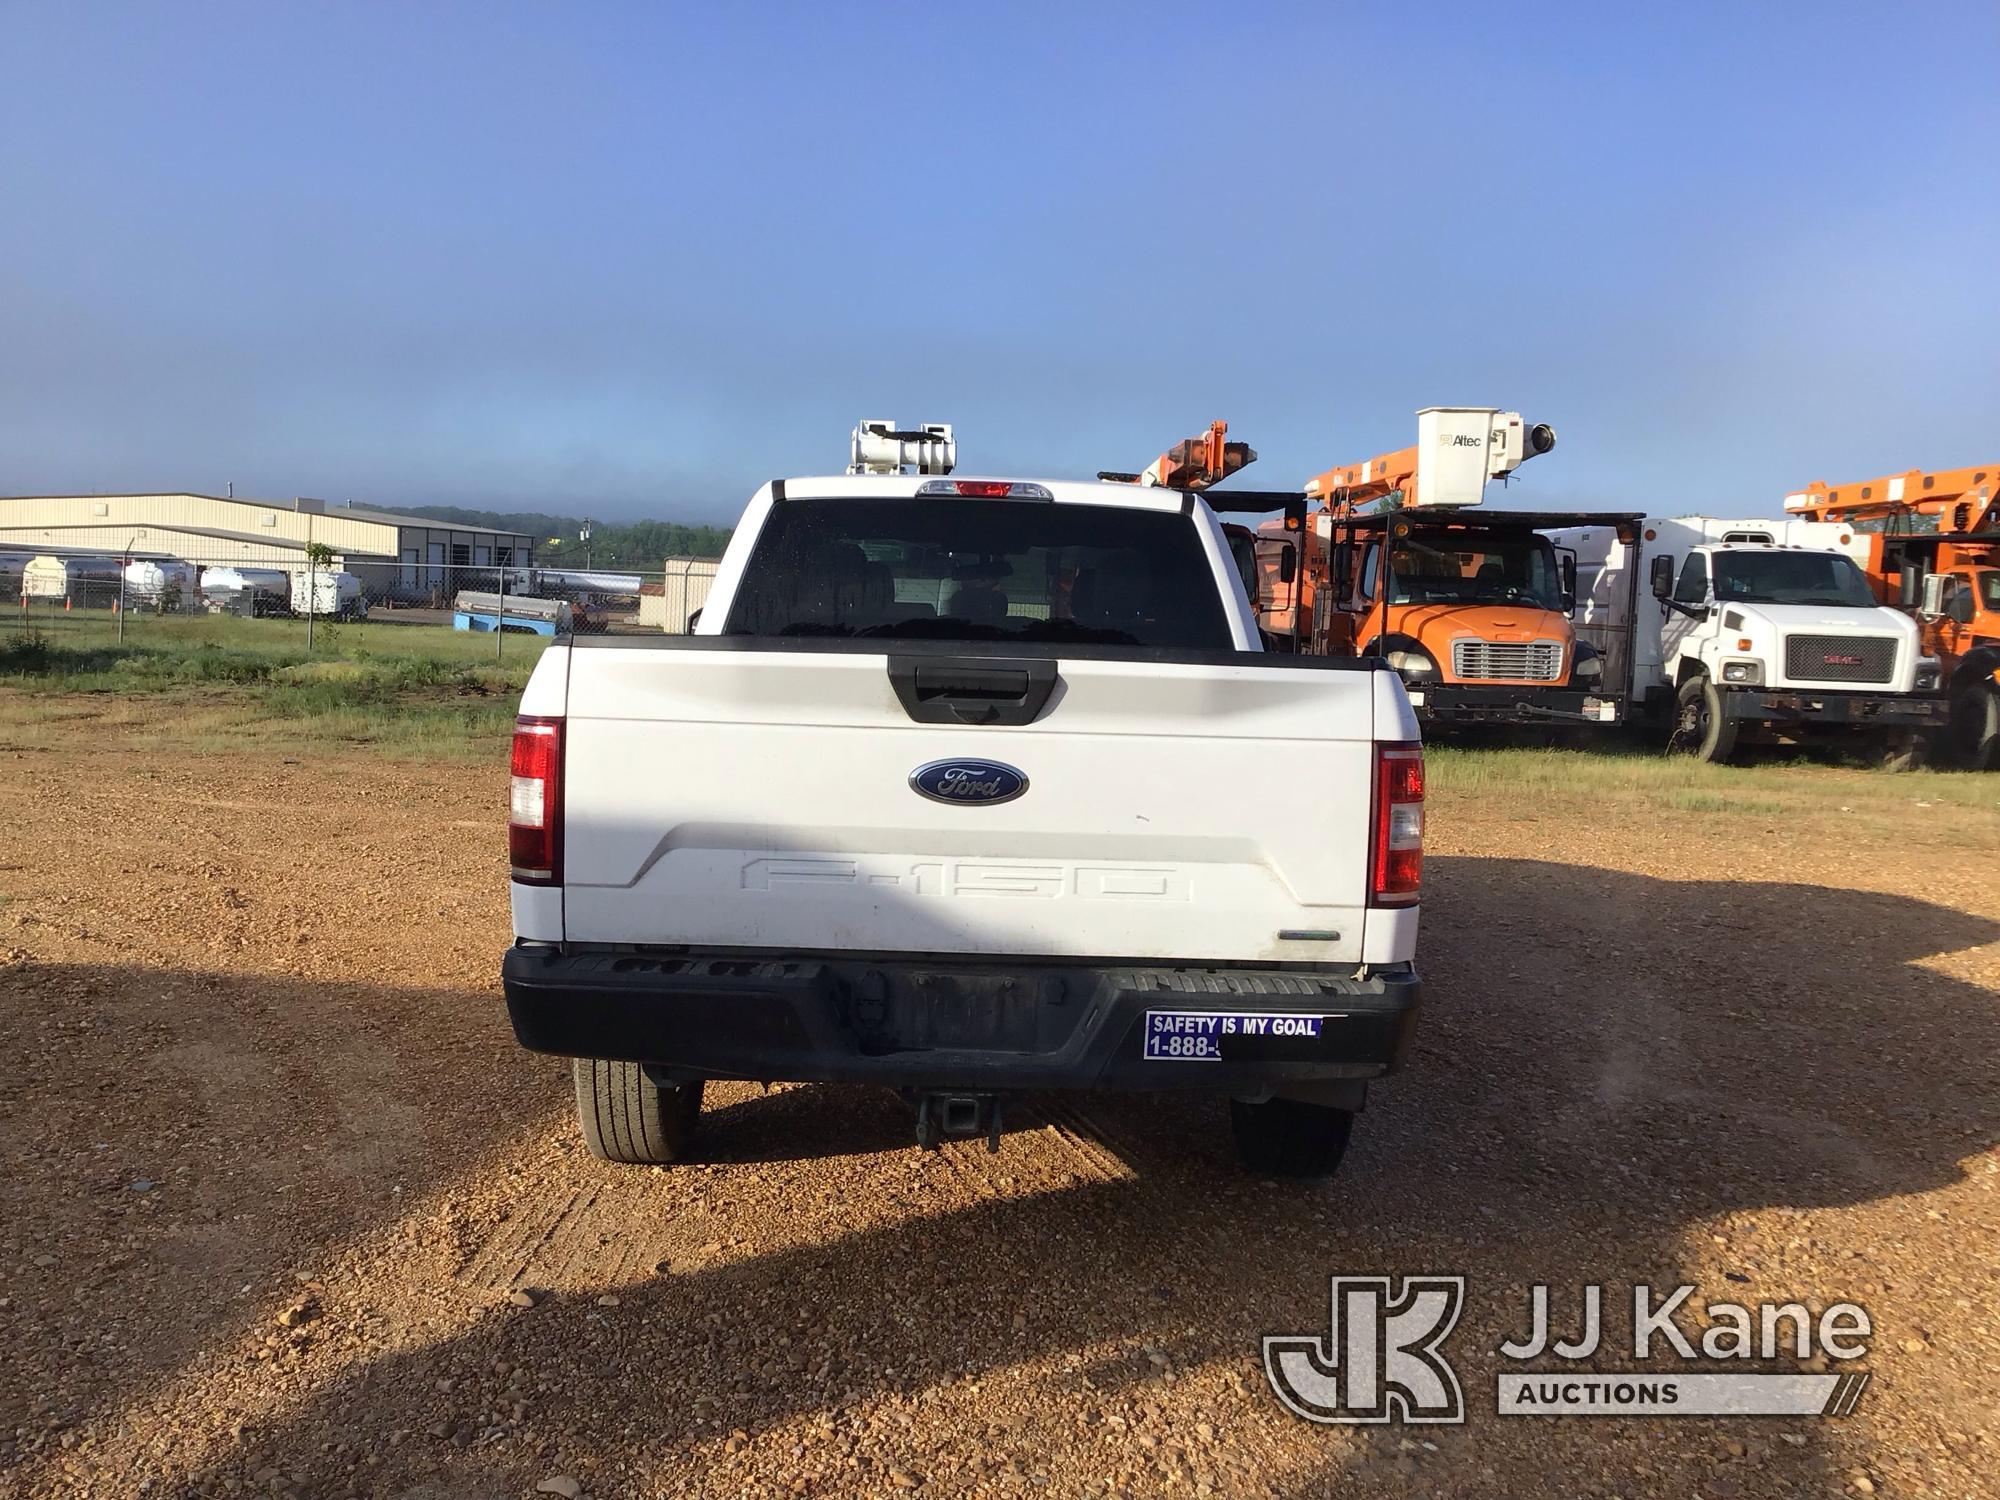 (Byram, MS) 2019 Ford F150 4x4 Extended-Cab Pickup Truck Runs & Moves) (Jump to start, Windshield Cr